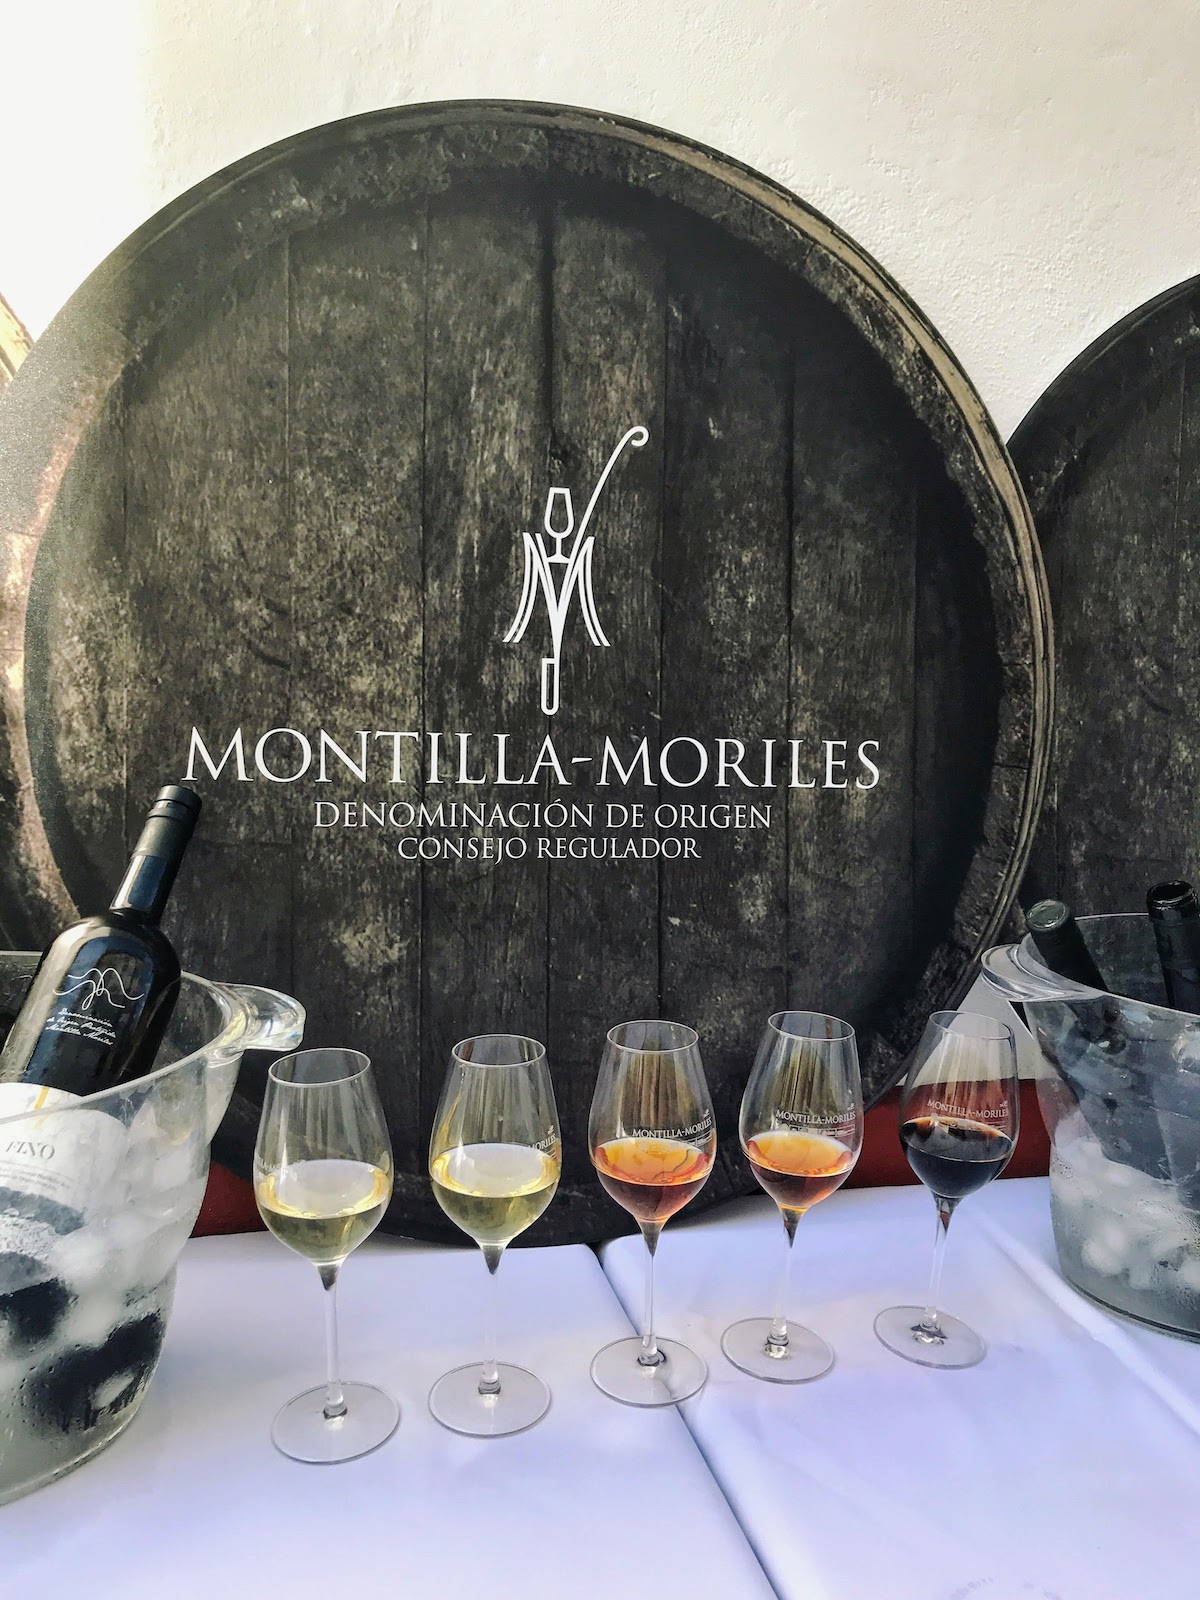 Five glasses of wine, ranging in color from pale yellow to dark brown, on a white table top in front of a black barrel reading "Montilla-Moriles."